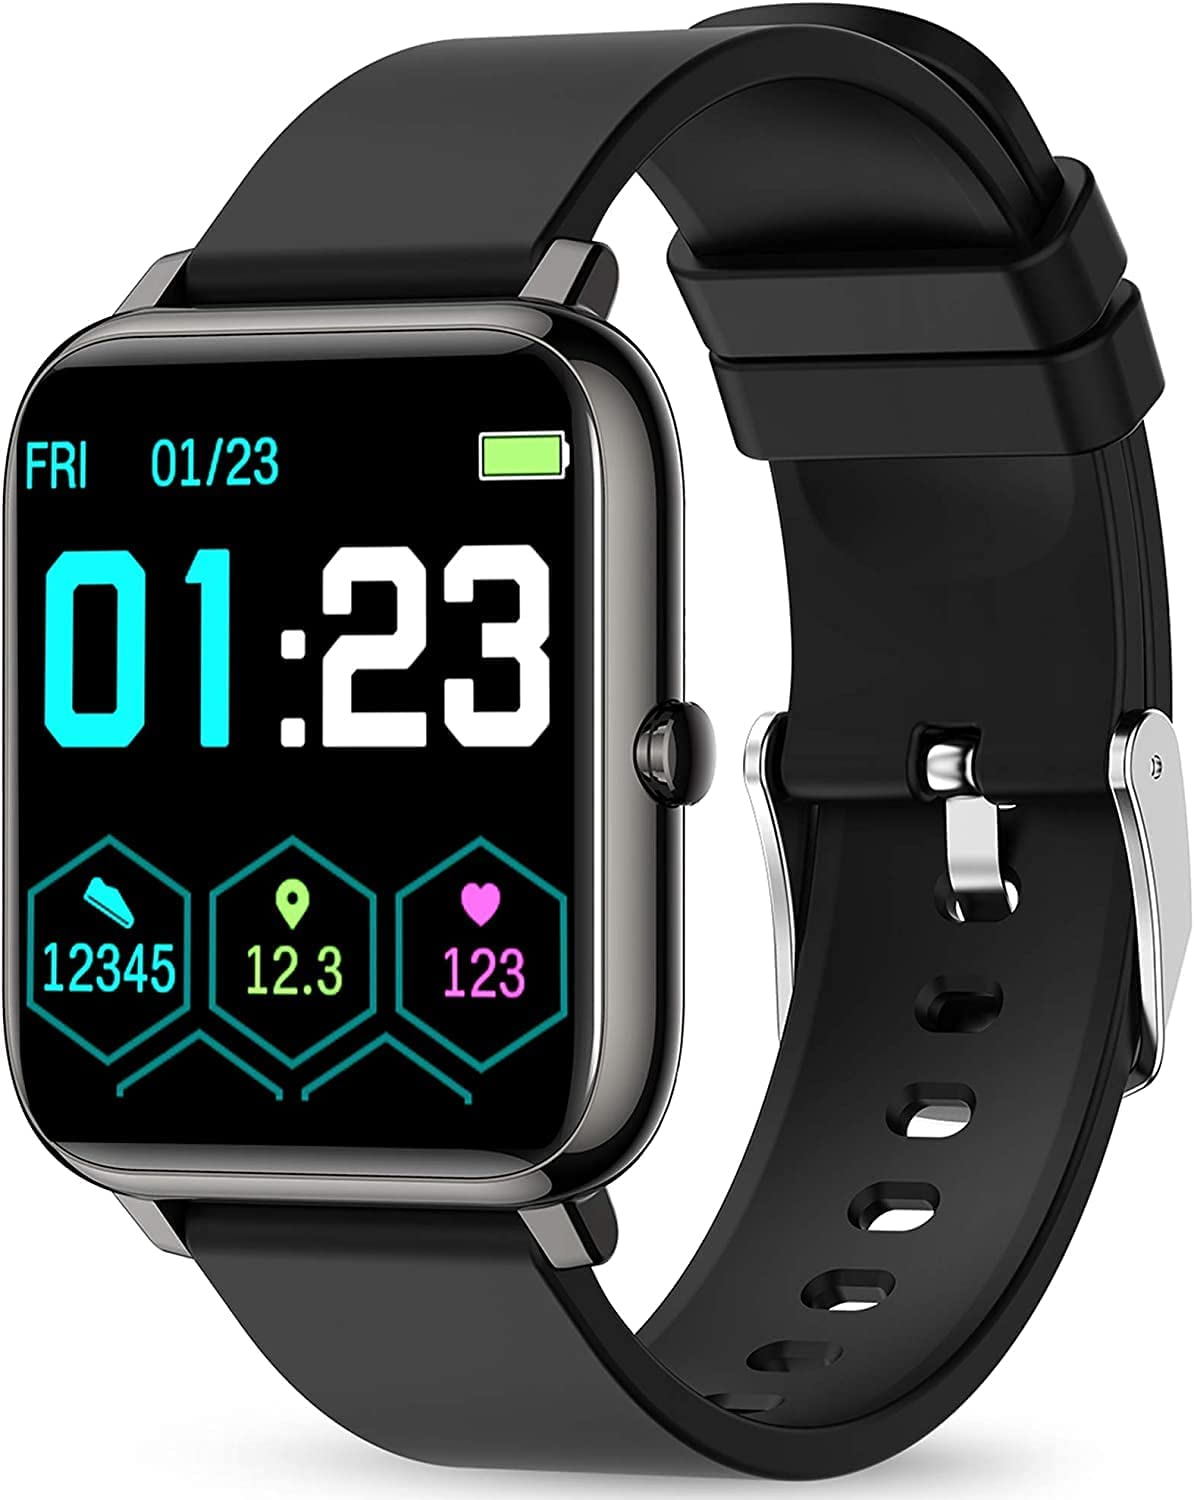 KALINCO Smart Watch With Fitness Tracker